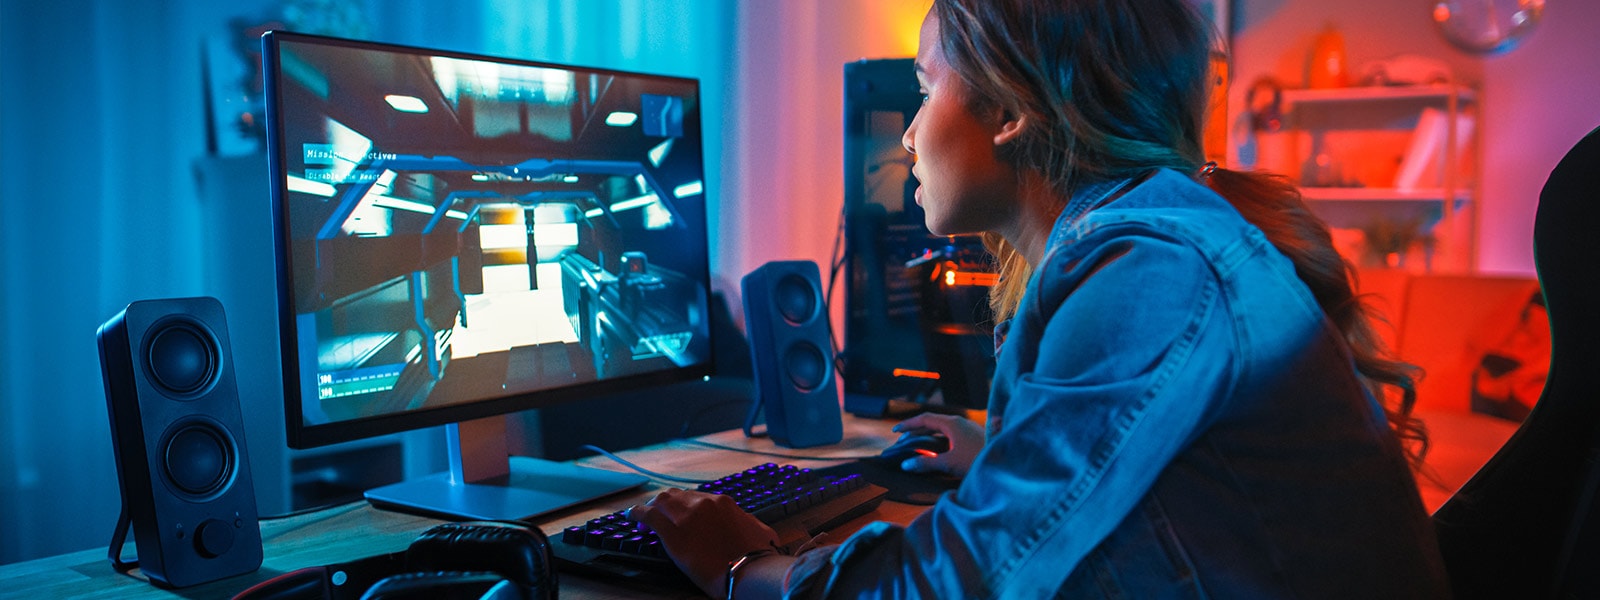 a woman in a jean jacket plays a computer game in a dark room